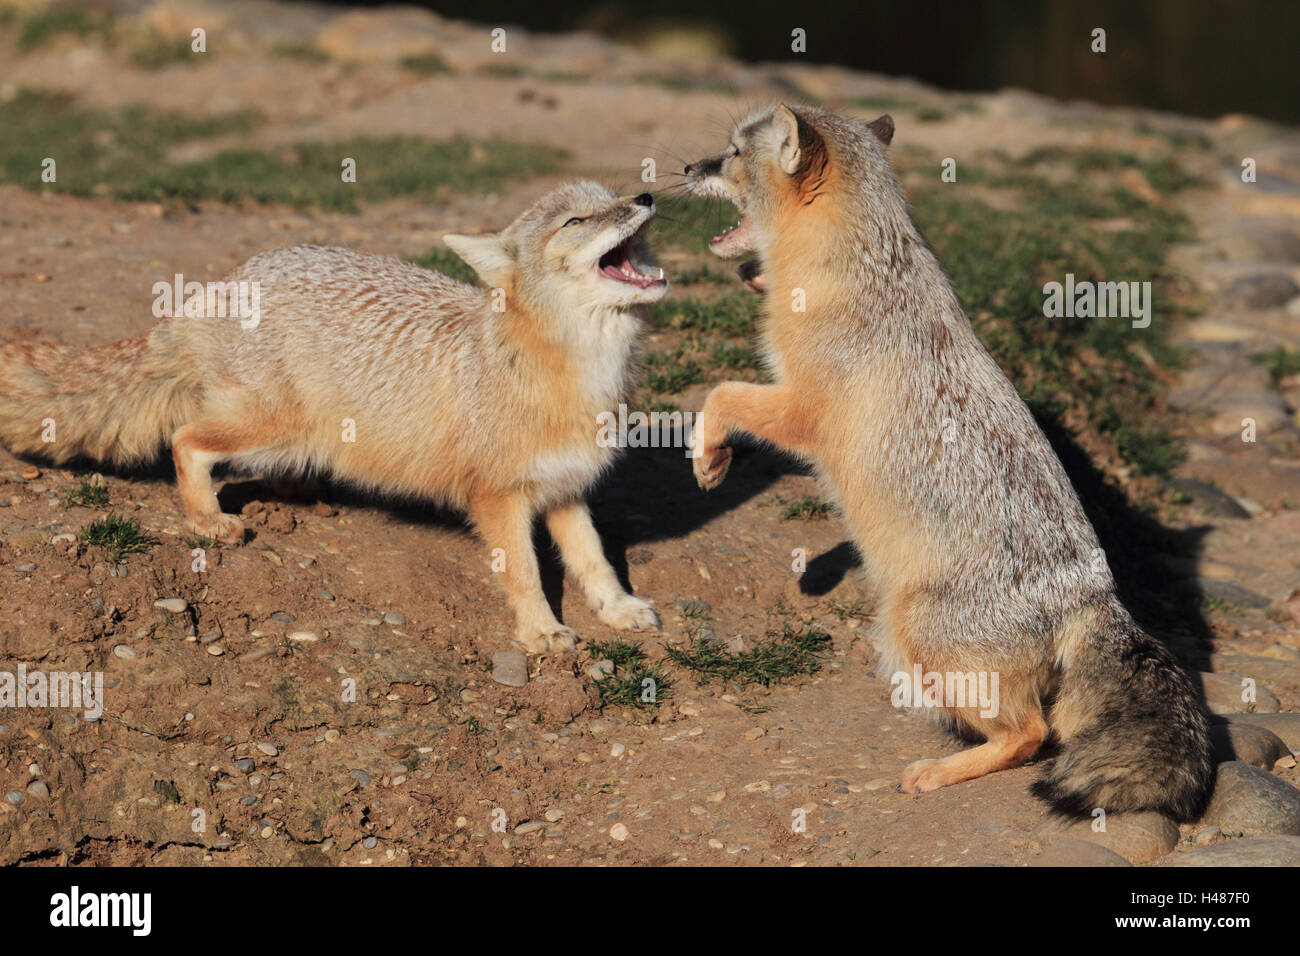 Steppe foxes, fight, medium close-up, Stock Photo